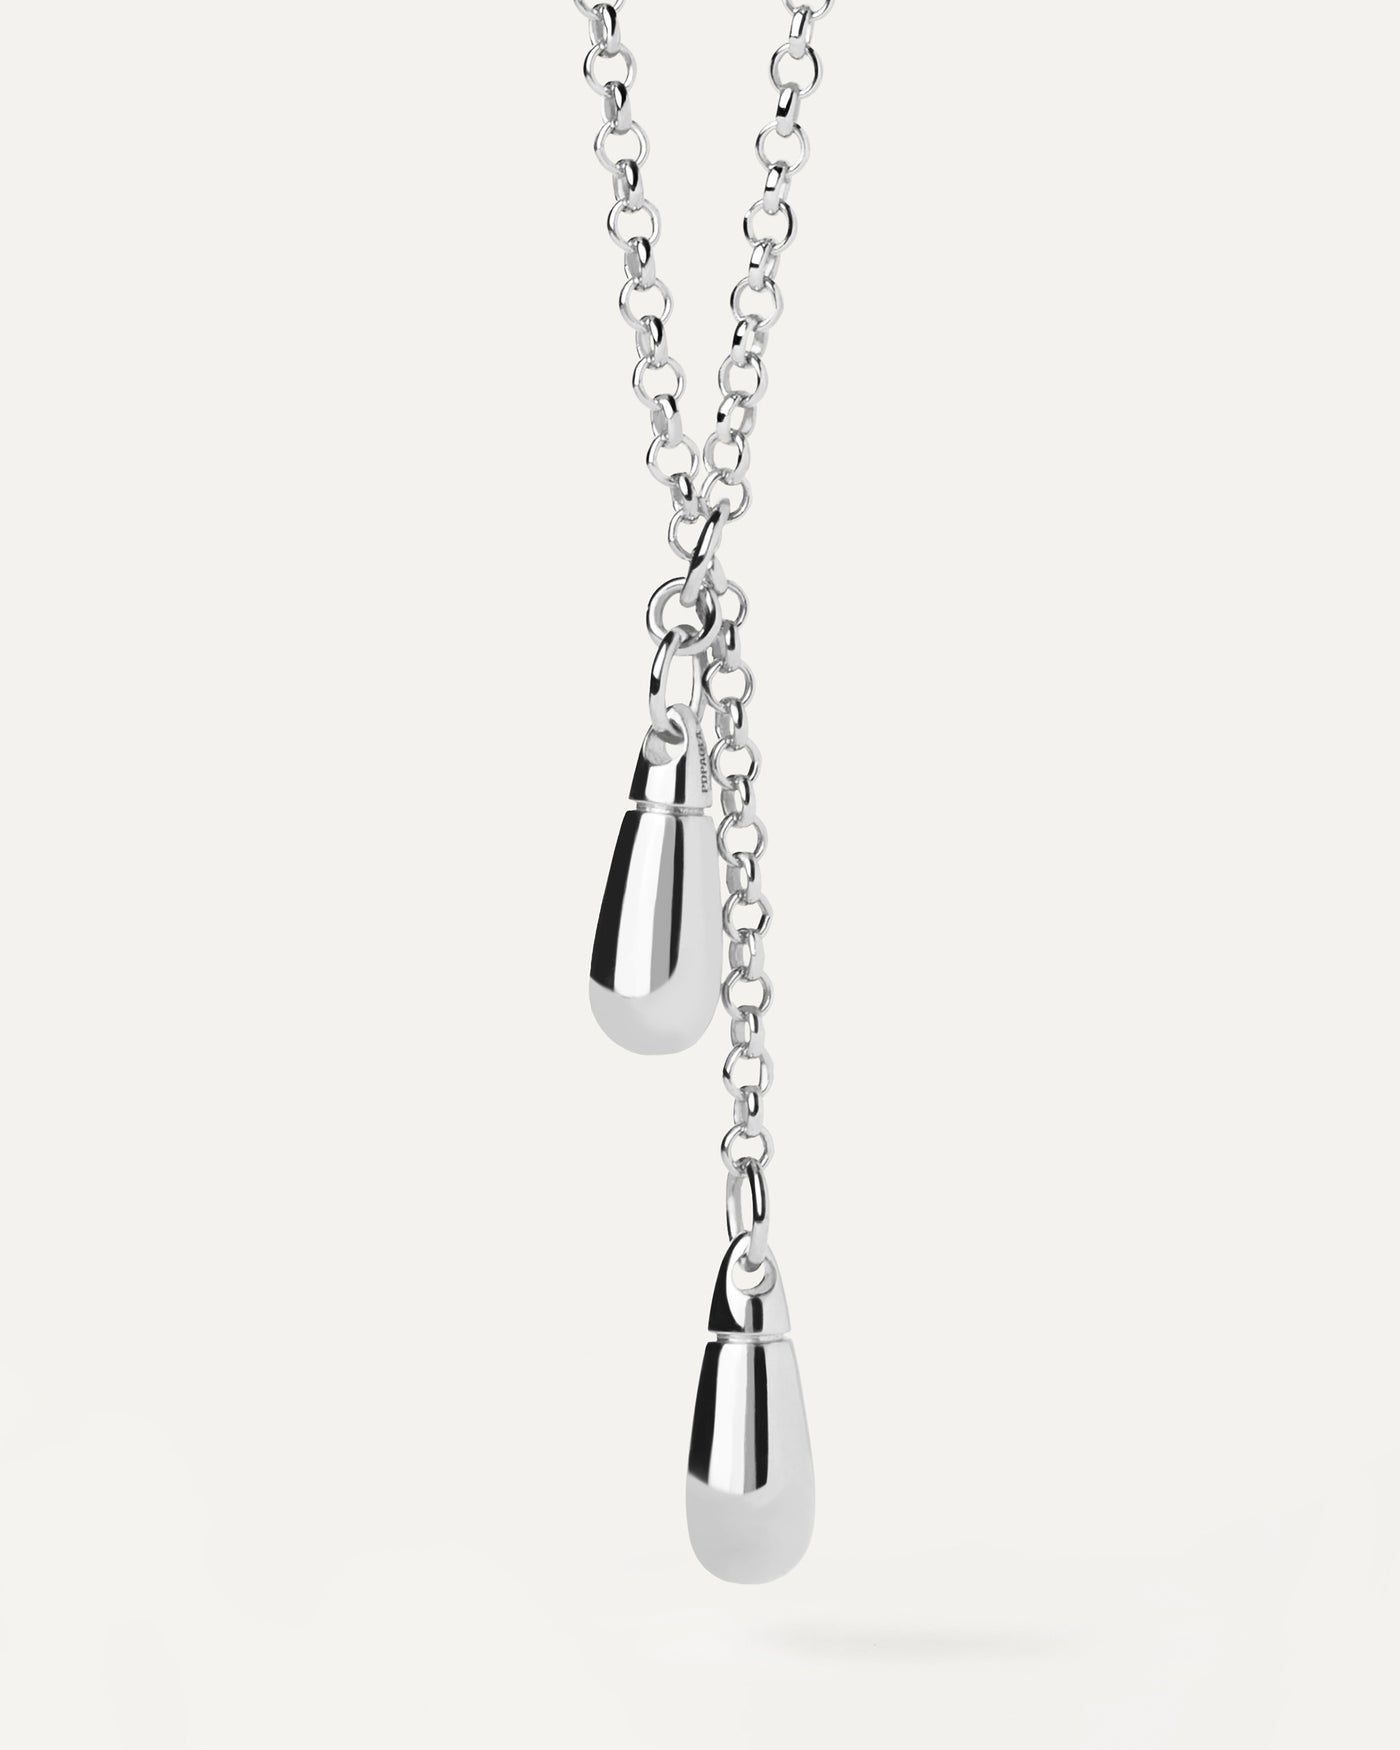 2023 Selection | Tango Silver Chain Necklace. Get the latest arrival from PDPAOLA. Place your order safely and get this Best Seller. Free Shipping.